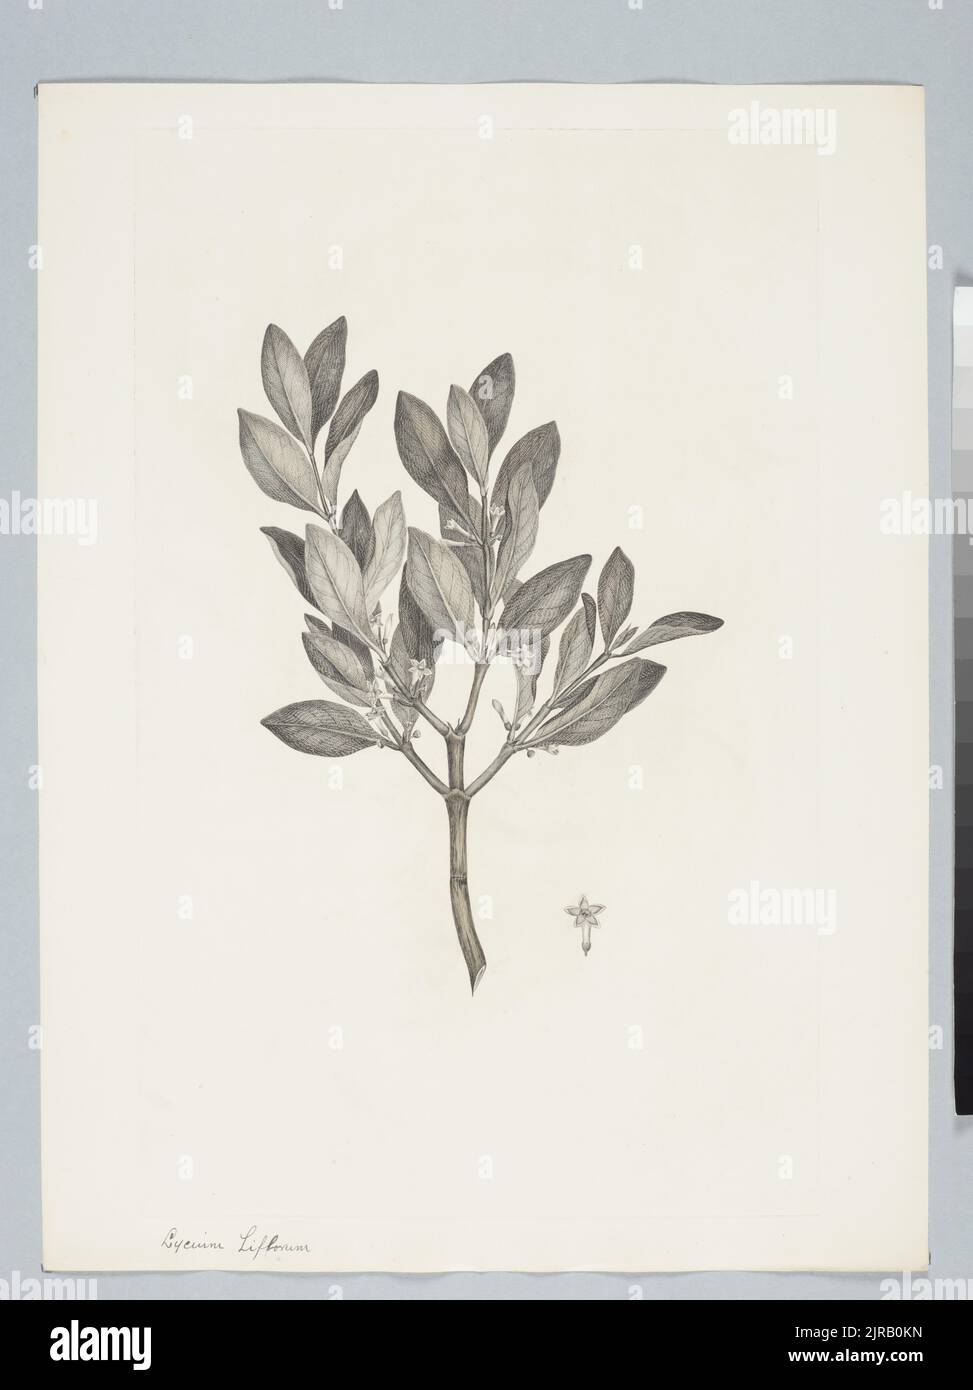 Canthium coprosmoides F. Mueller, by Sydney Parkinson. Gift of the British Museum, 1895. Stock Photo